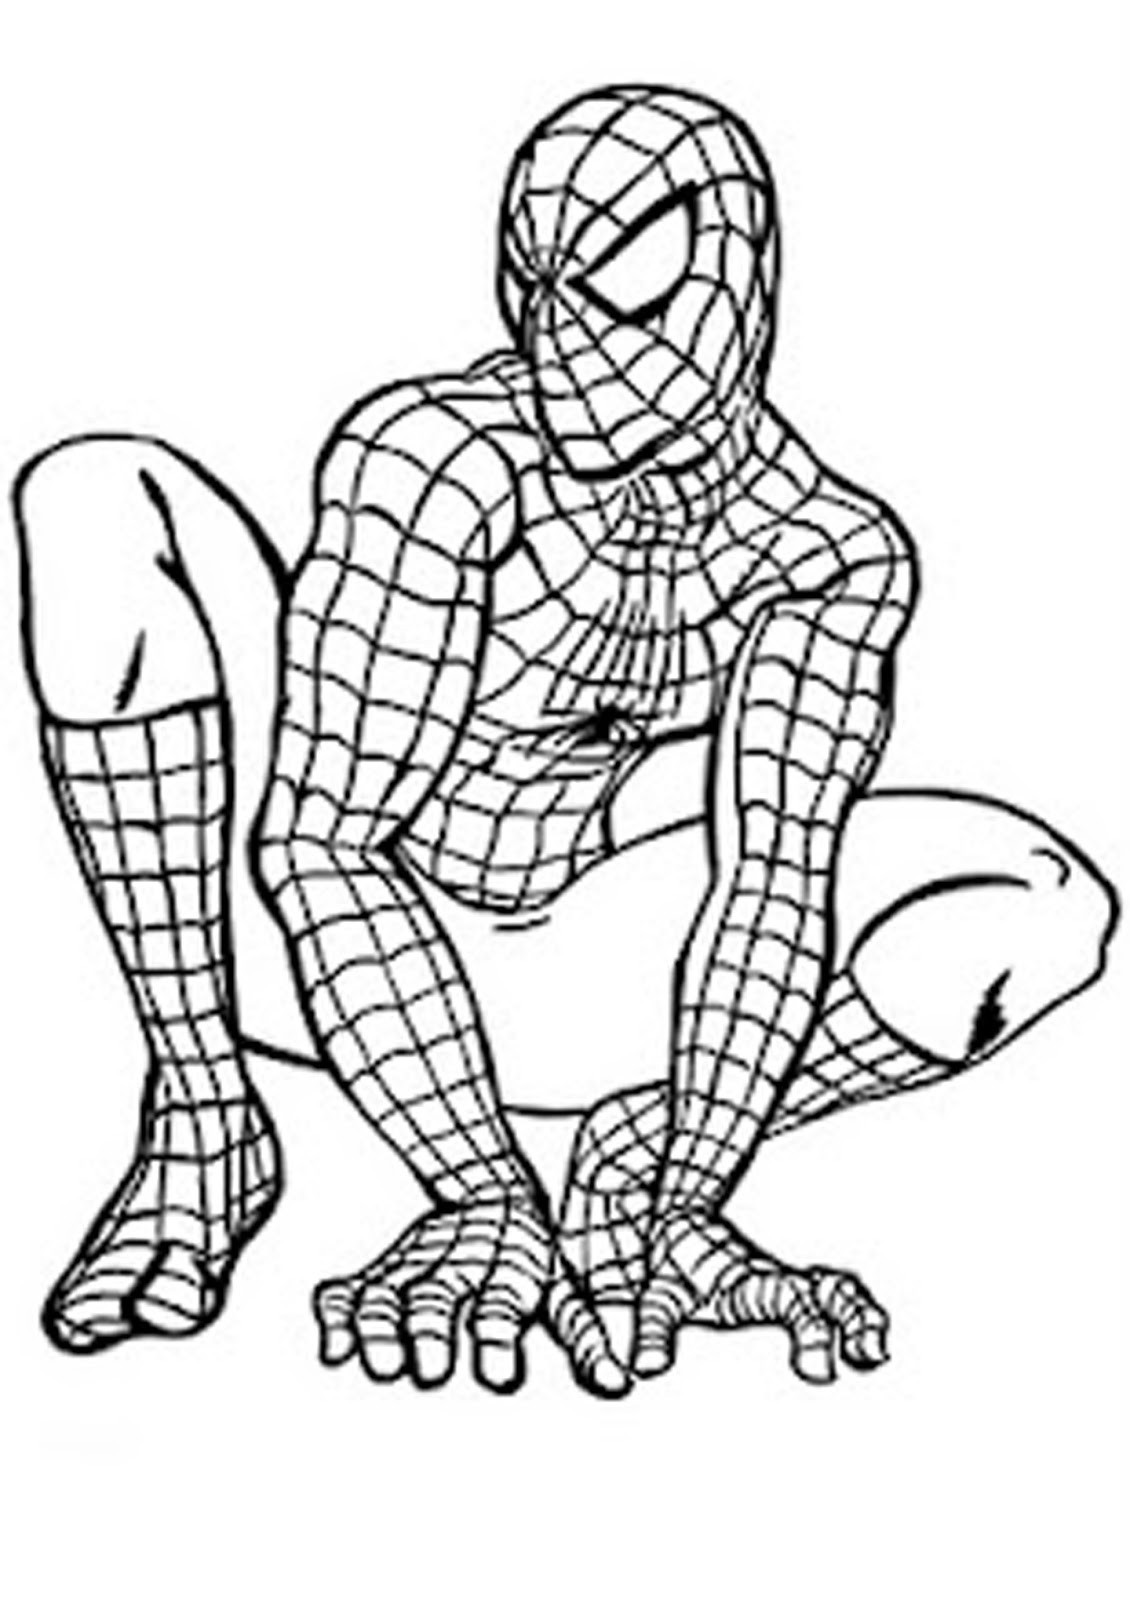 Coloring Sheets For Boys To Print
 Coloring Sheets For Boys Coloring Pages For Kids Coloring